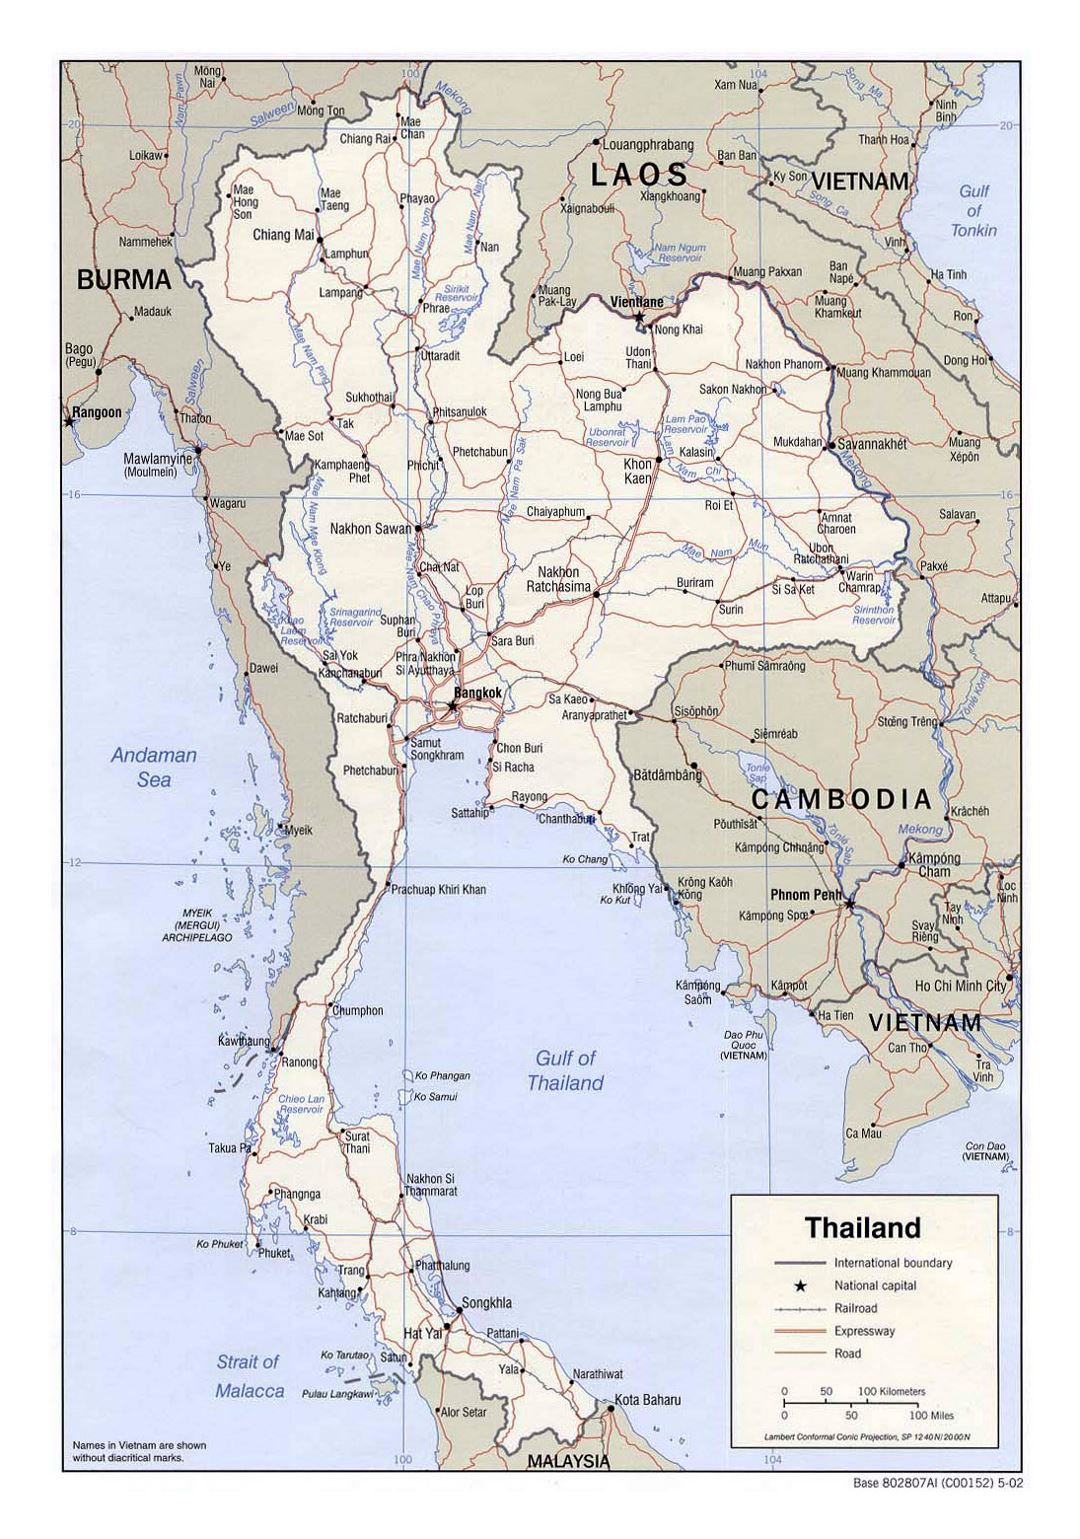 Detailed political map of Thailand with roads, railorads and major cities - 2002